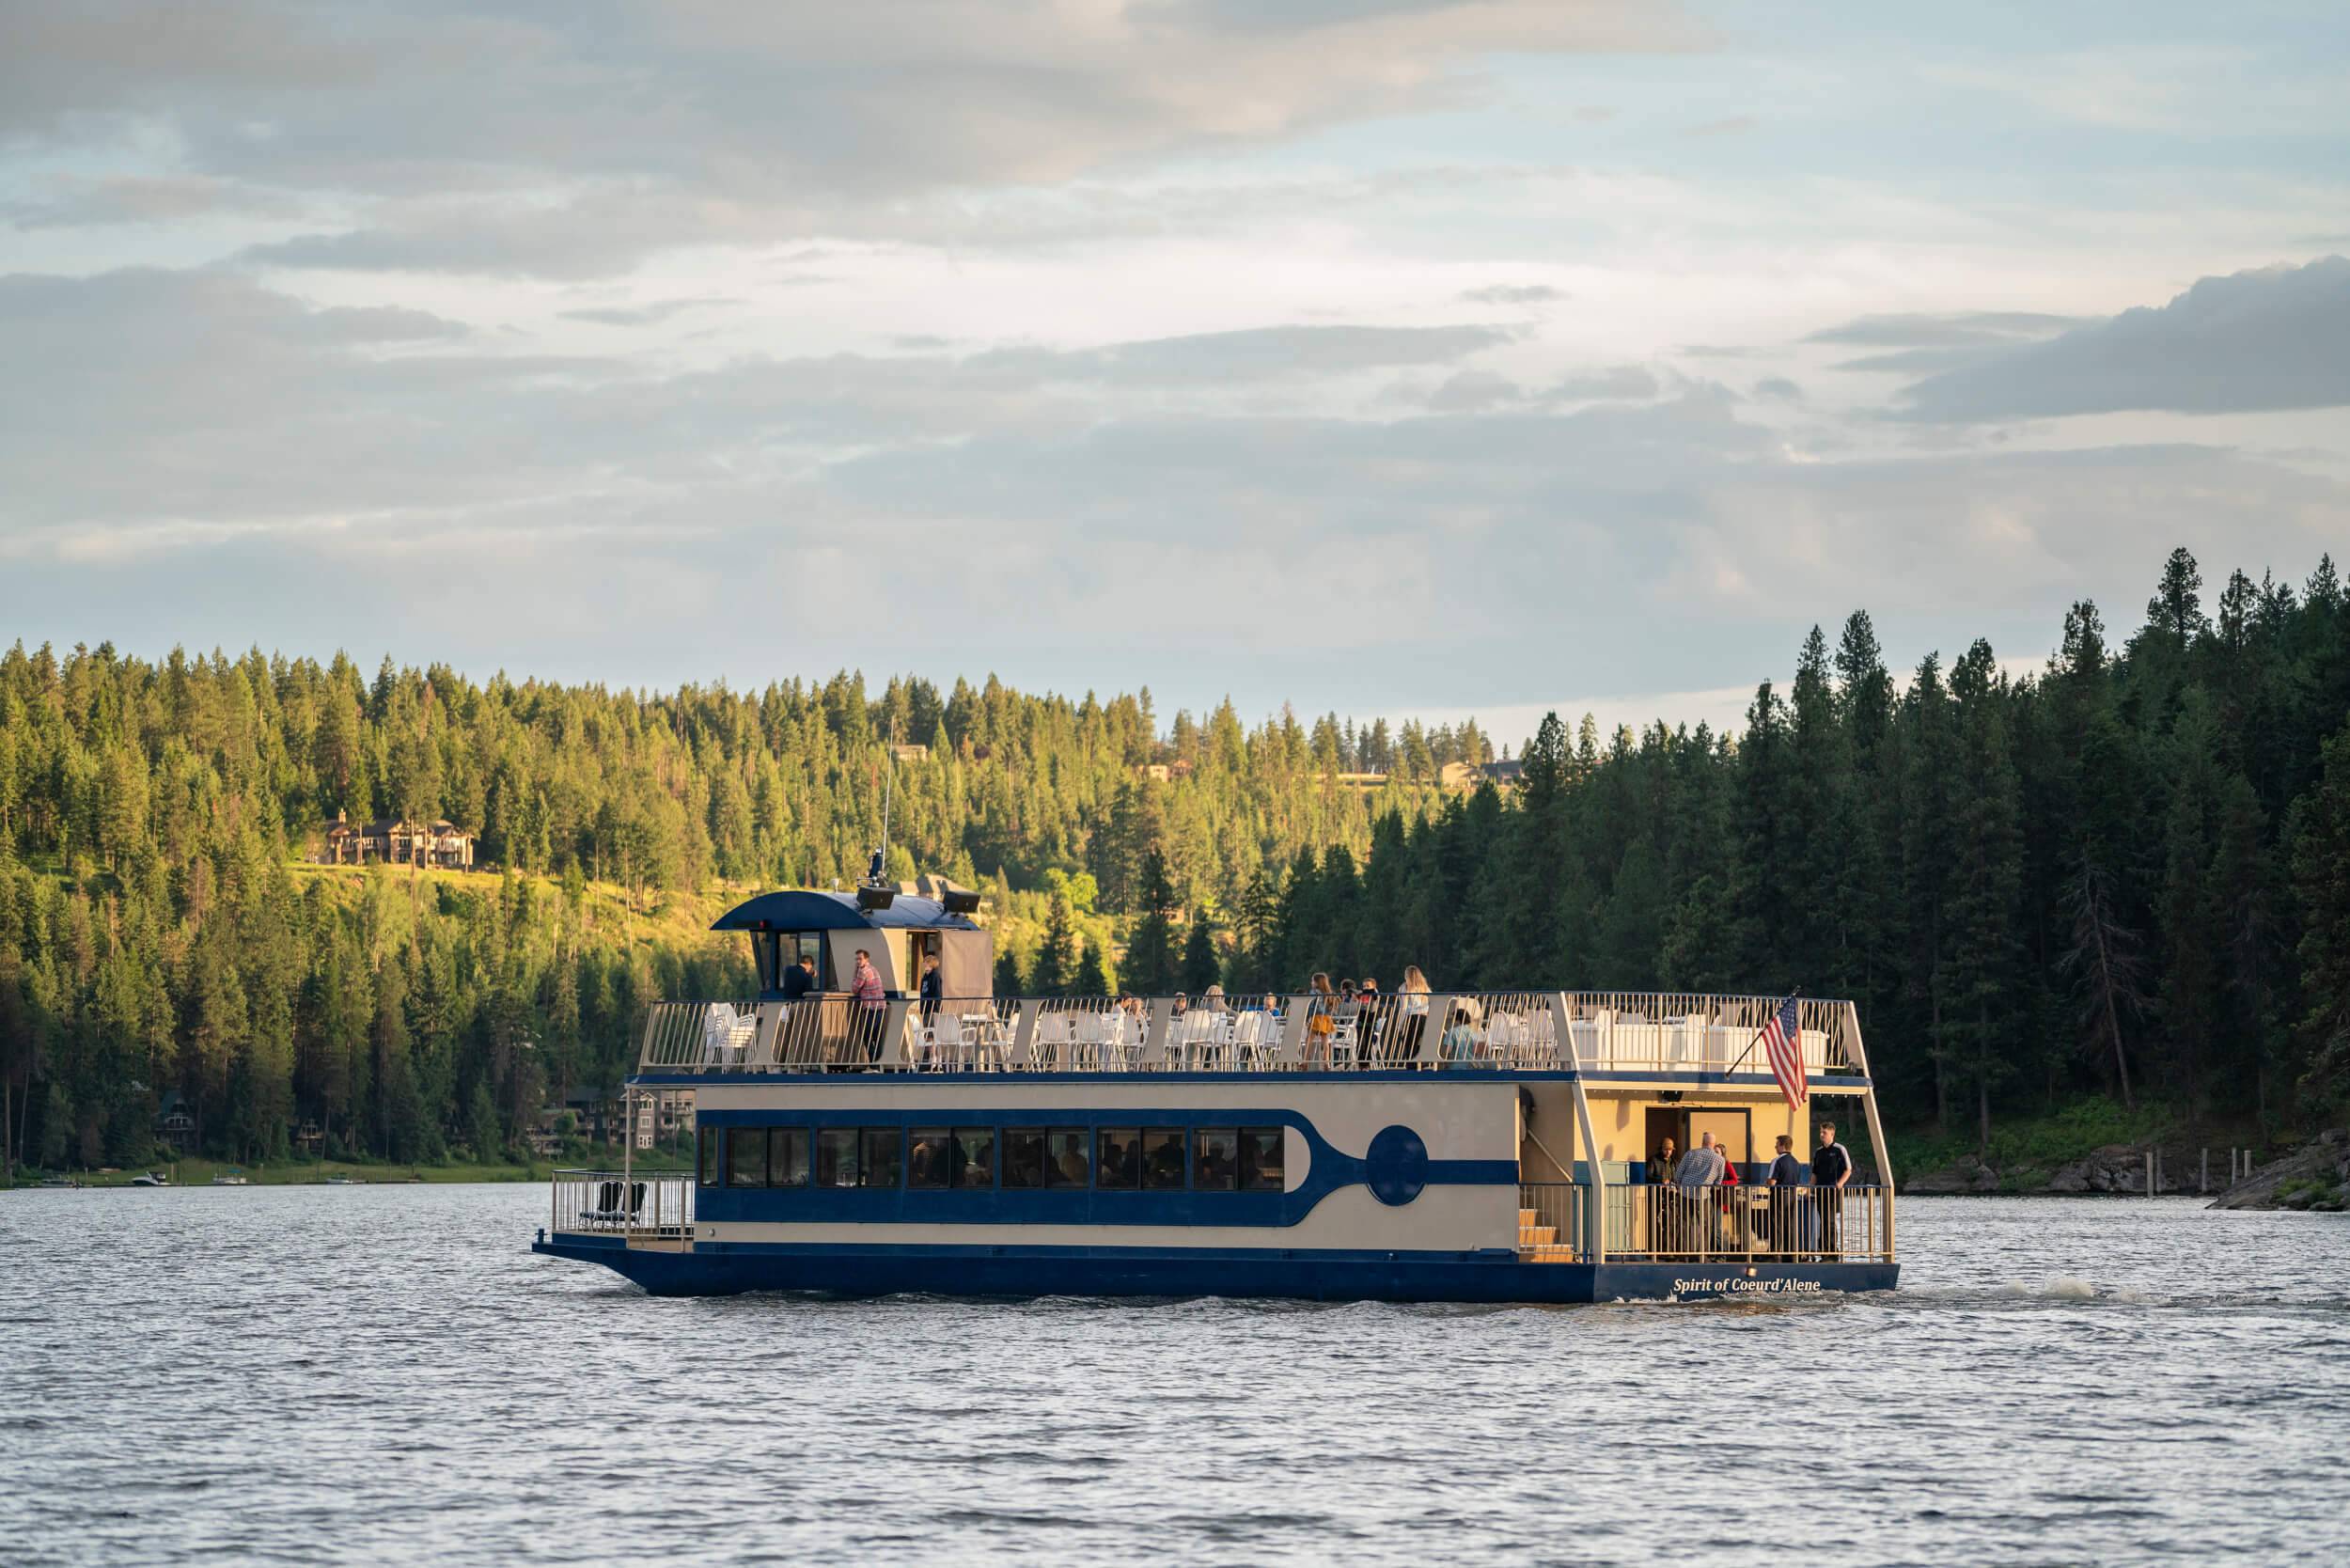 CDA Cruise ship with passengers on Lake Coeur d'Alene surrounded by trees